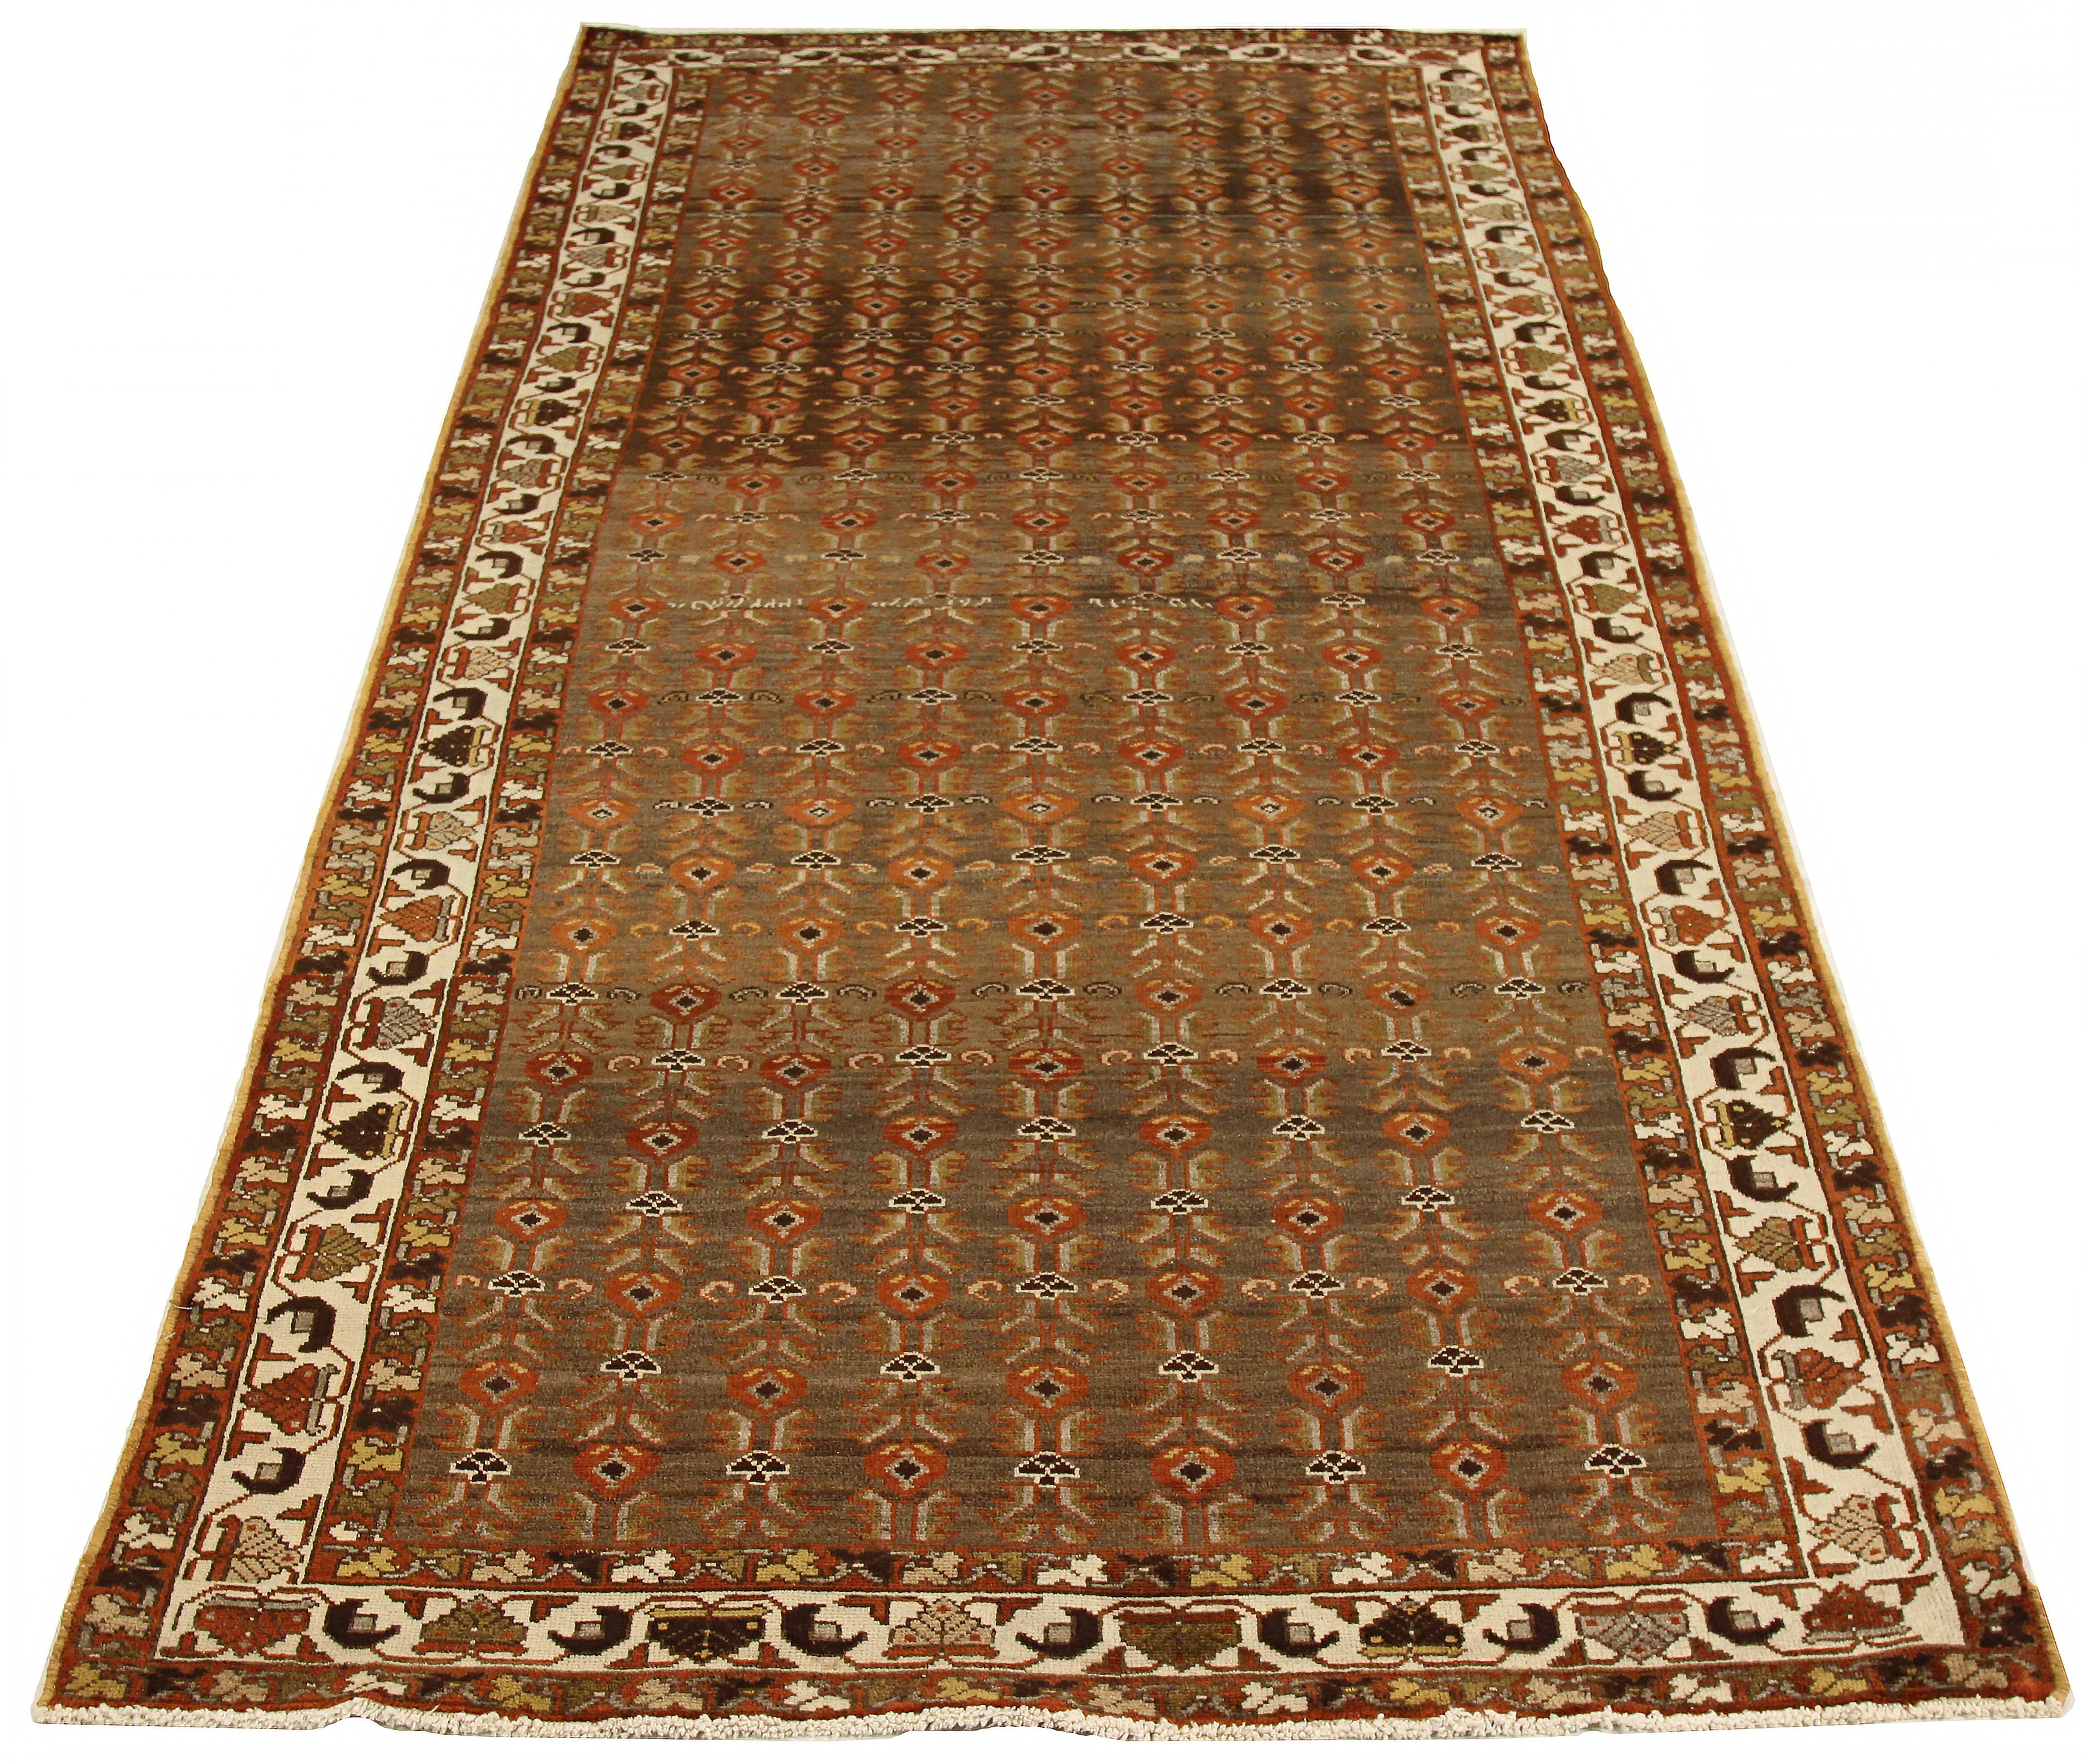 Antique Persian area rug handwoven from the finest sheep’s wool. It’s colored with all-natural vegetable dyes that are safe for humans and pets. It’s a traditional Saveh design featuring botanical details on a red and brown field. It’s a lovely